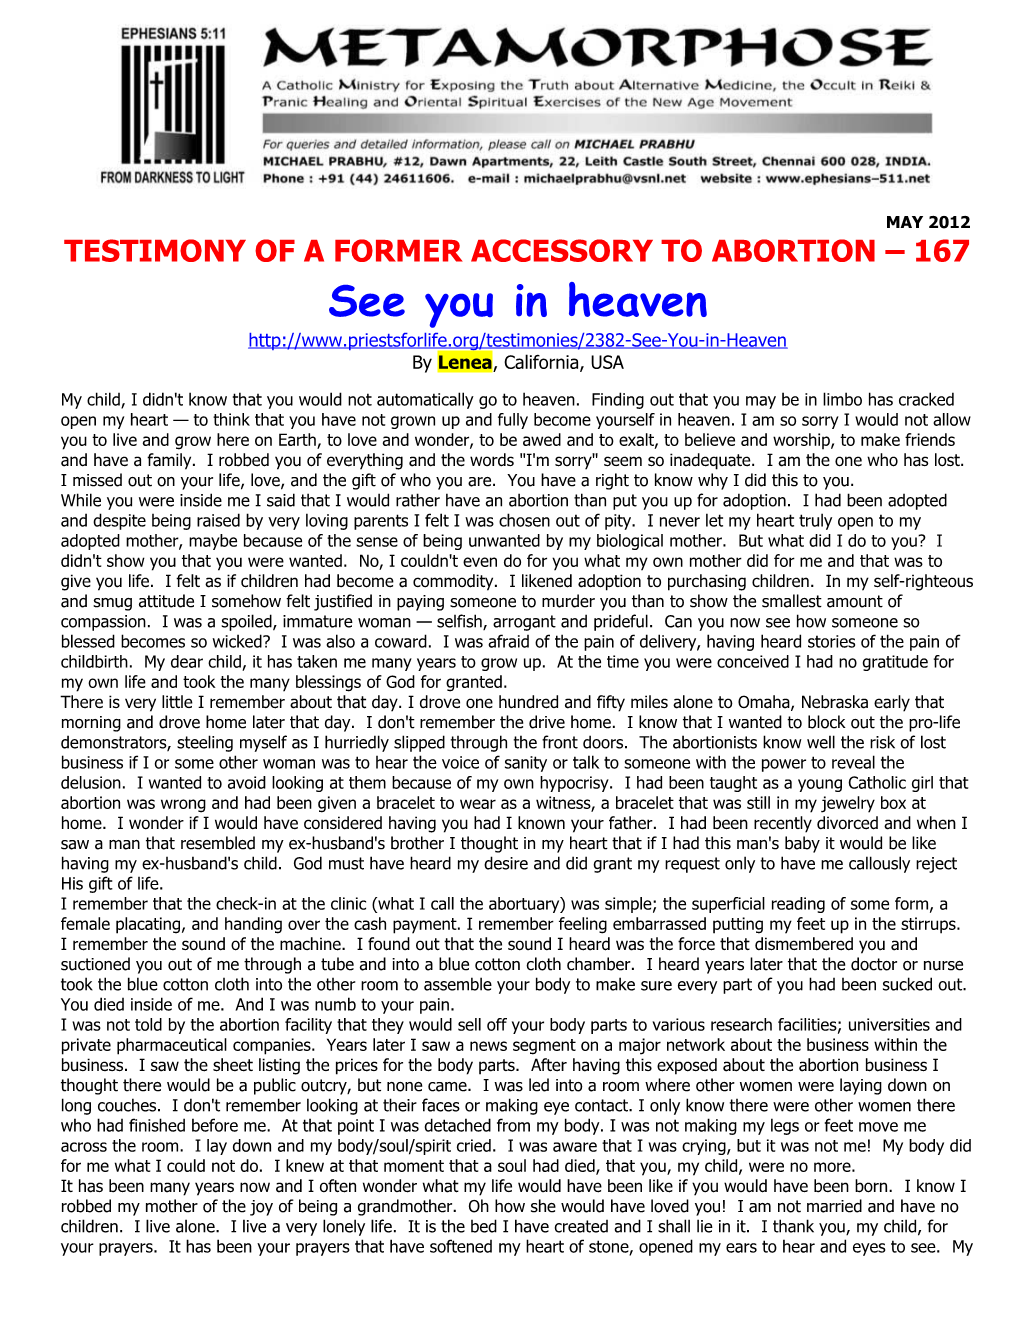 Testimony of a Former Accessory to Abortion 167